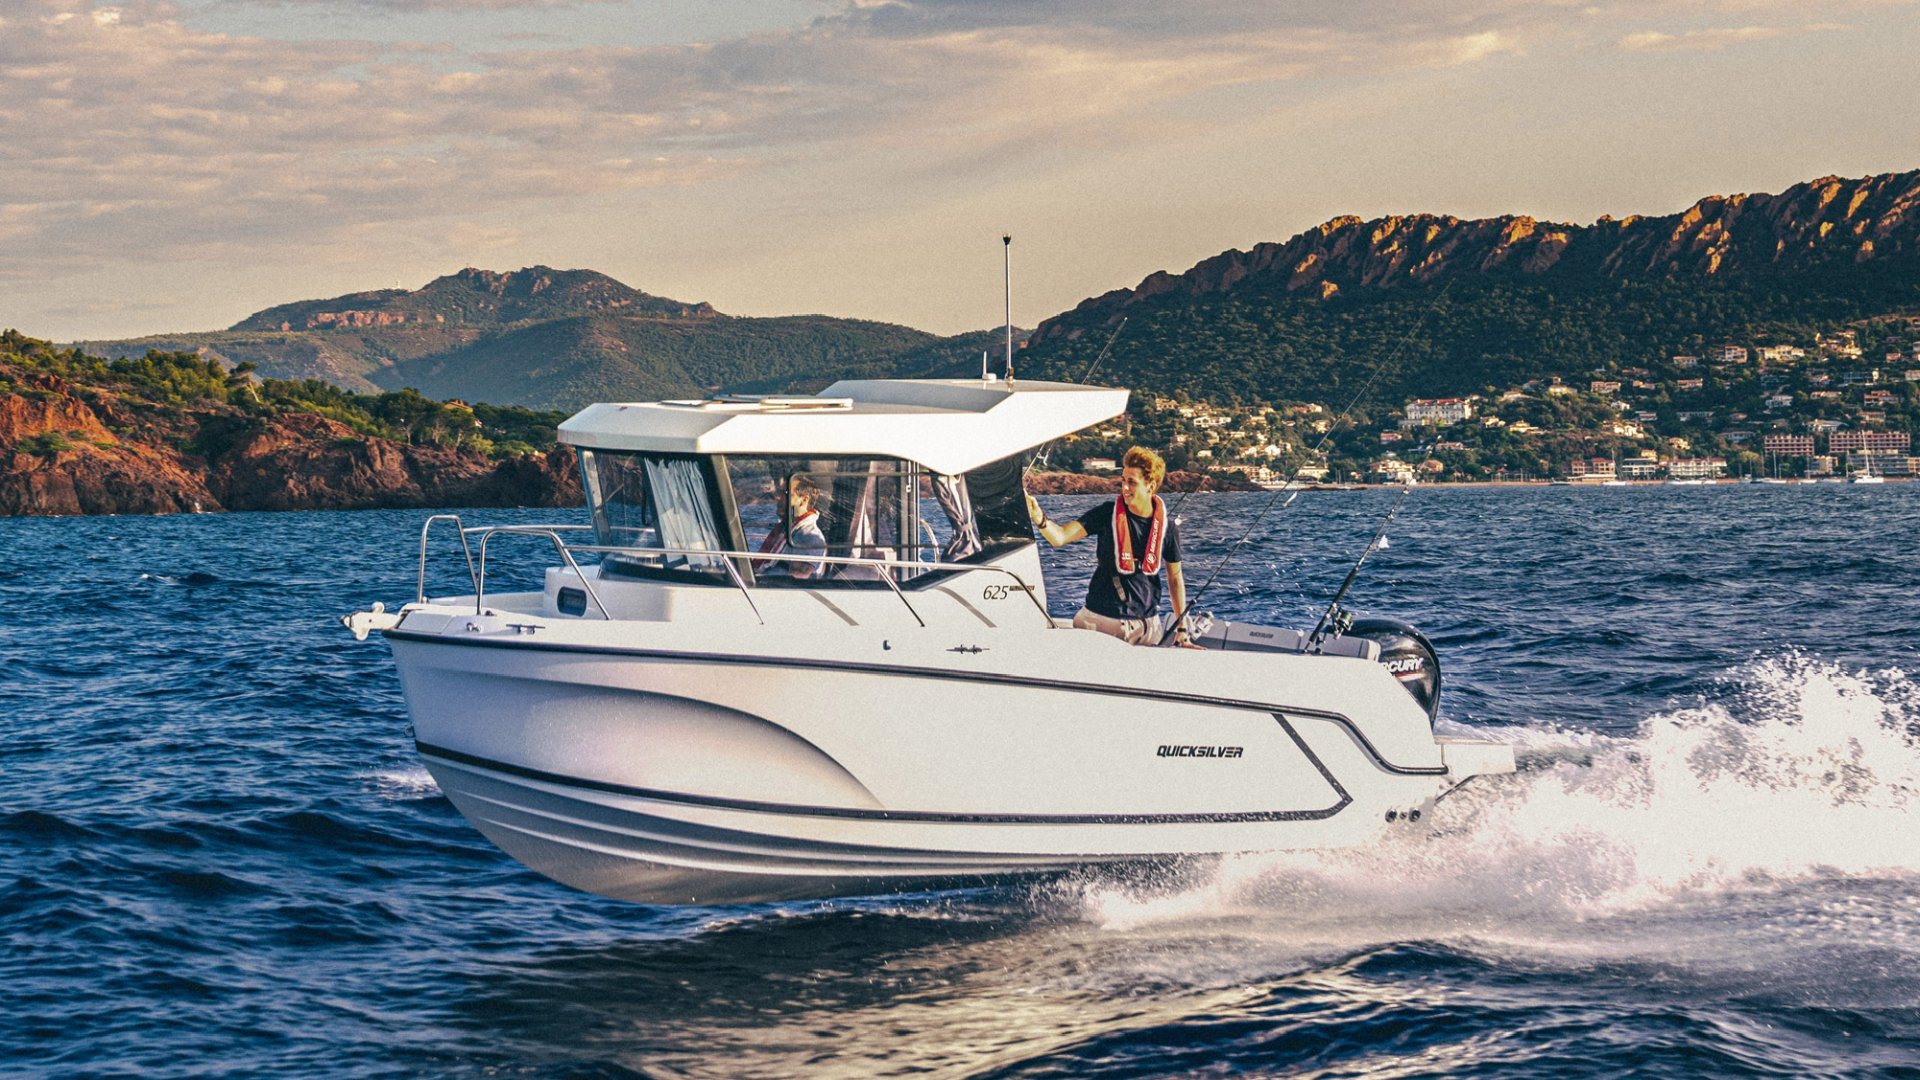 360 VR Virtual Tours of the [VBS-IT] Quicksilver 625 Pilothouse